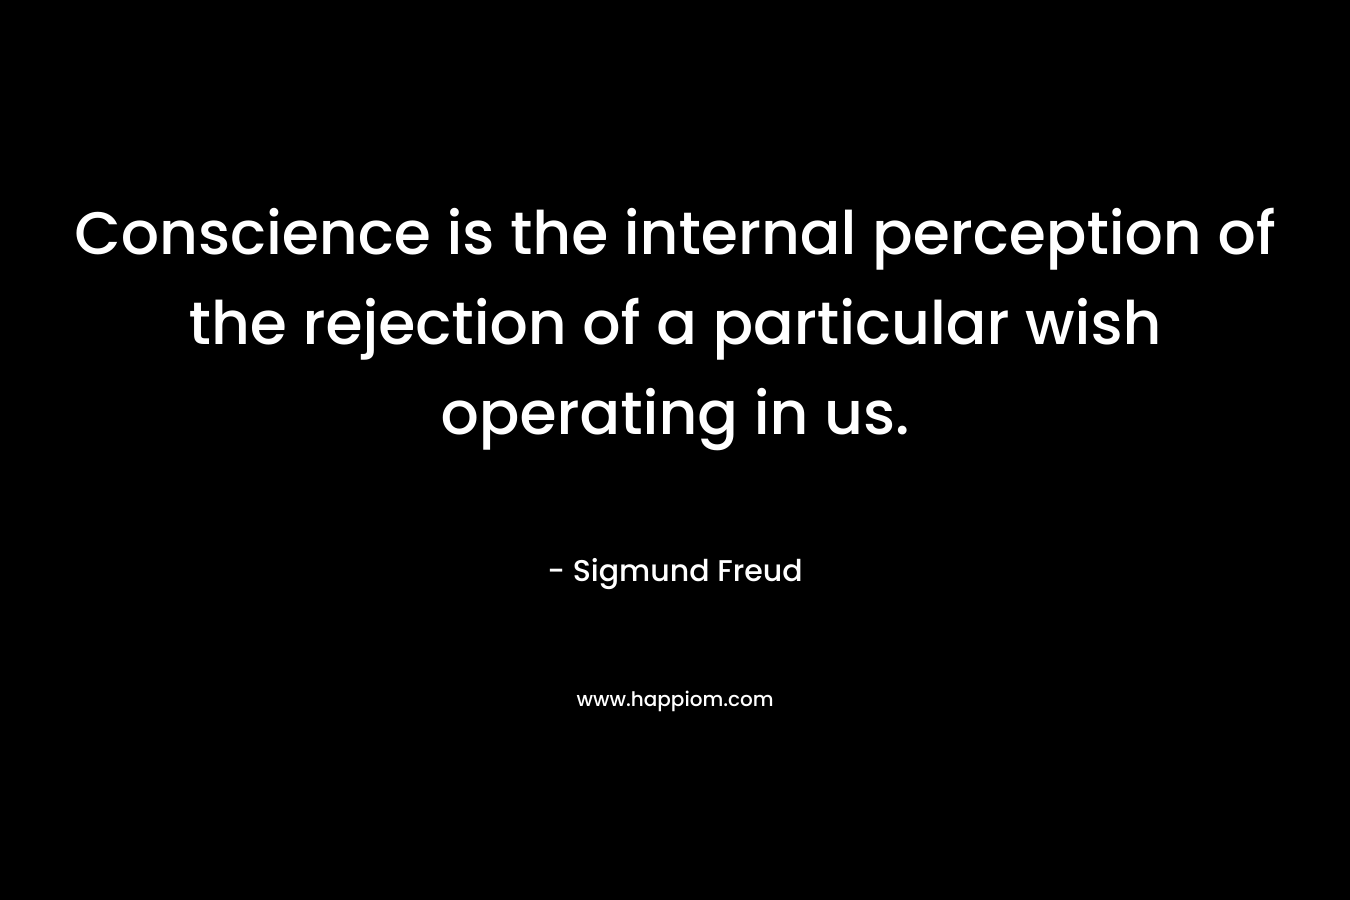 Conscience is the internal perception of the rejection of a particular wish operating in us. – Sigmund Freud